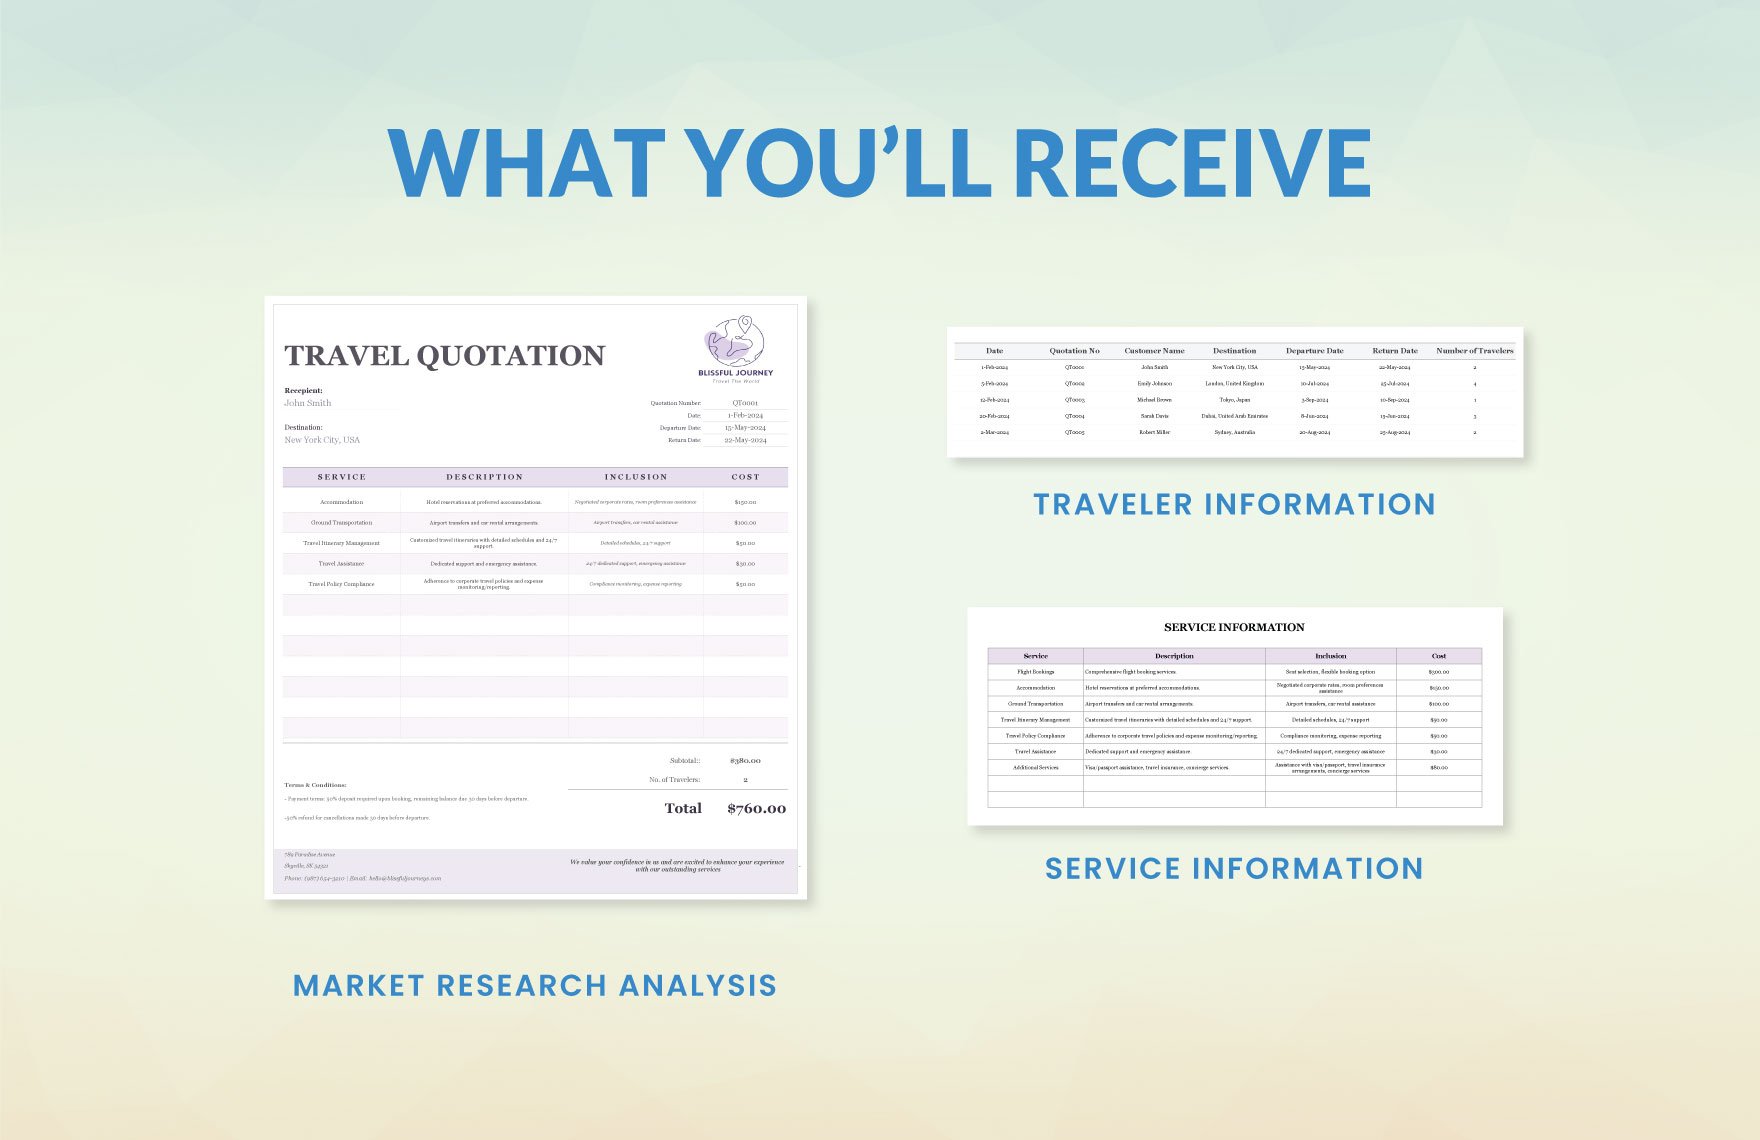 Business Travel Services Quotation Template